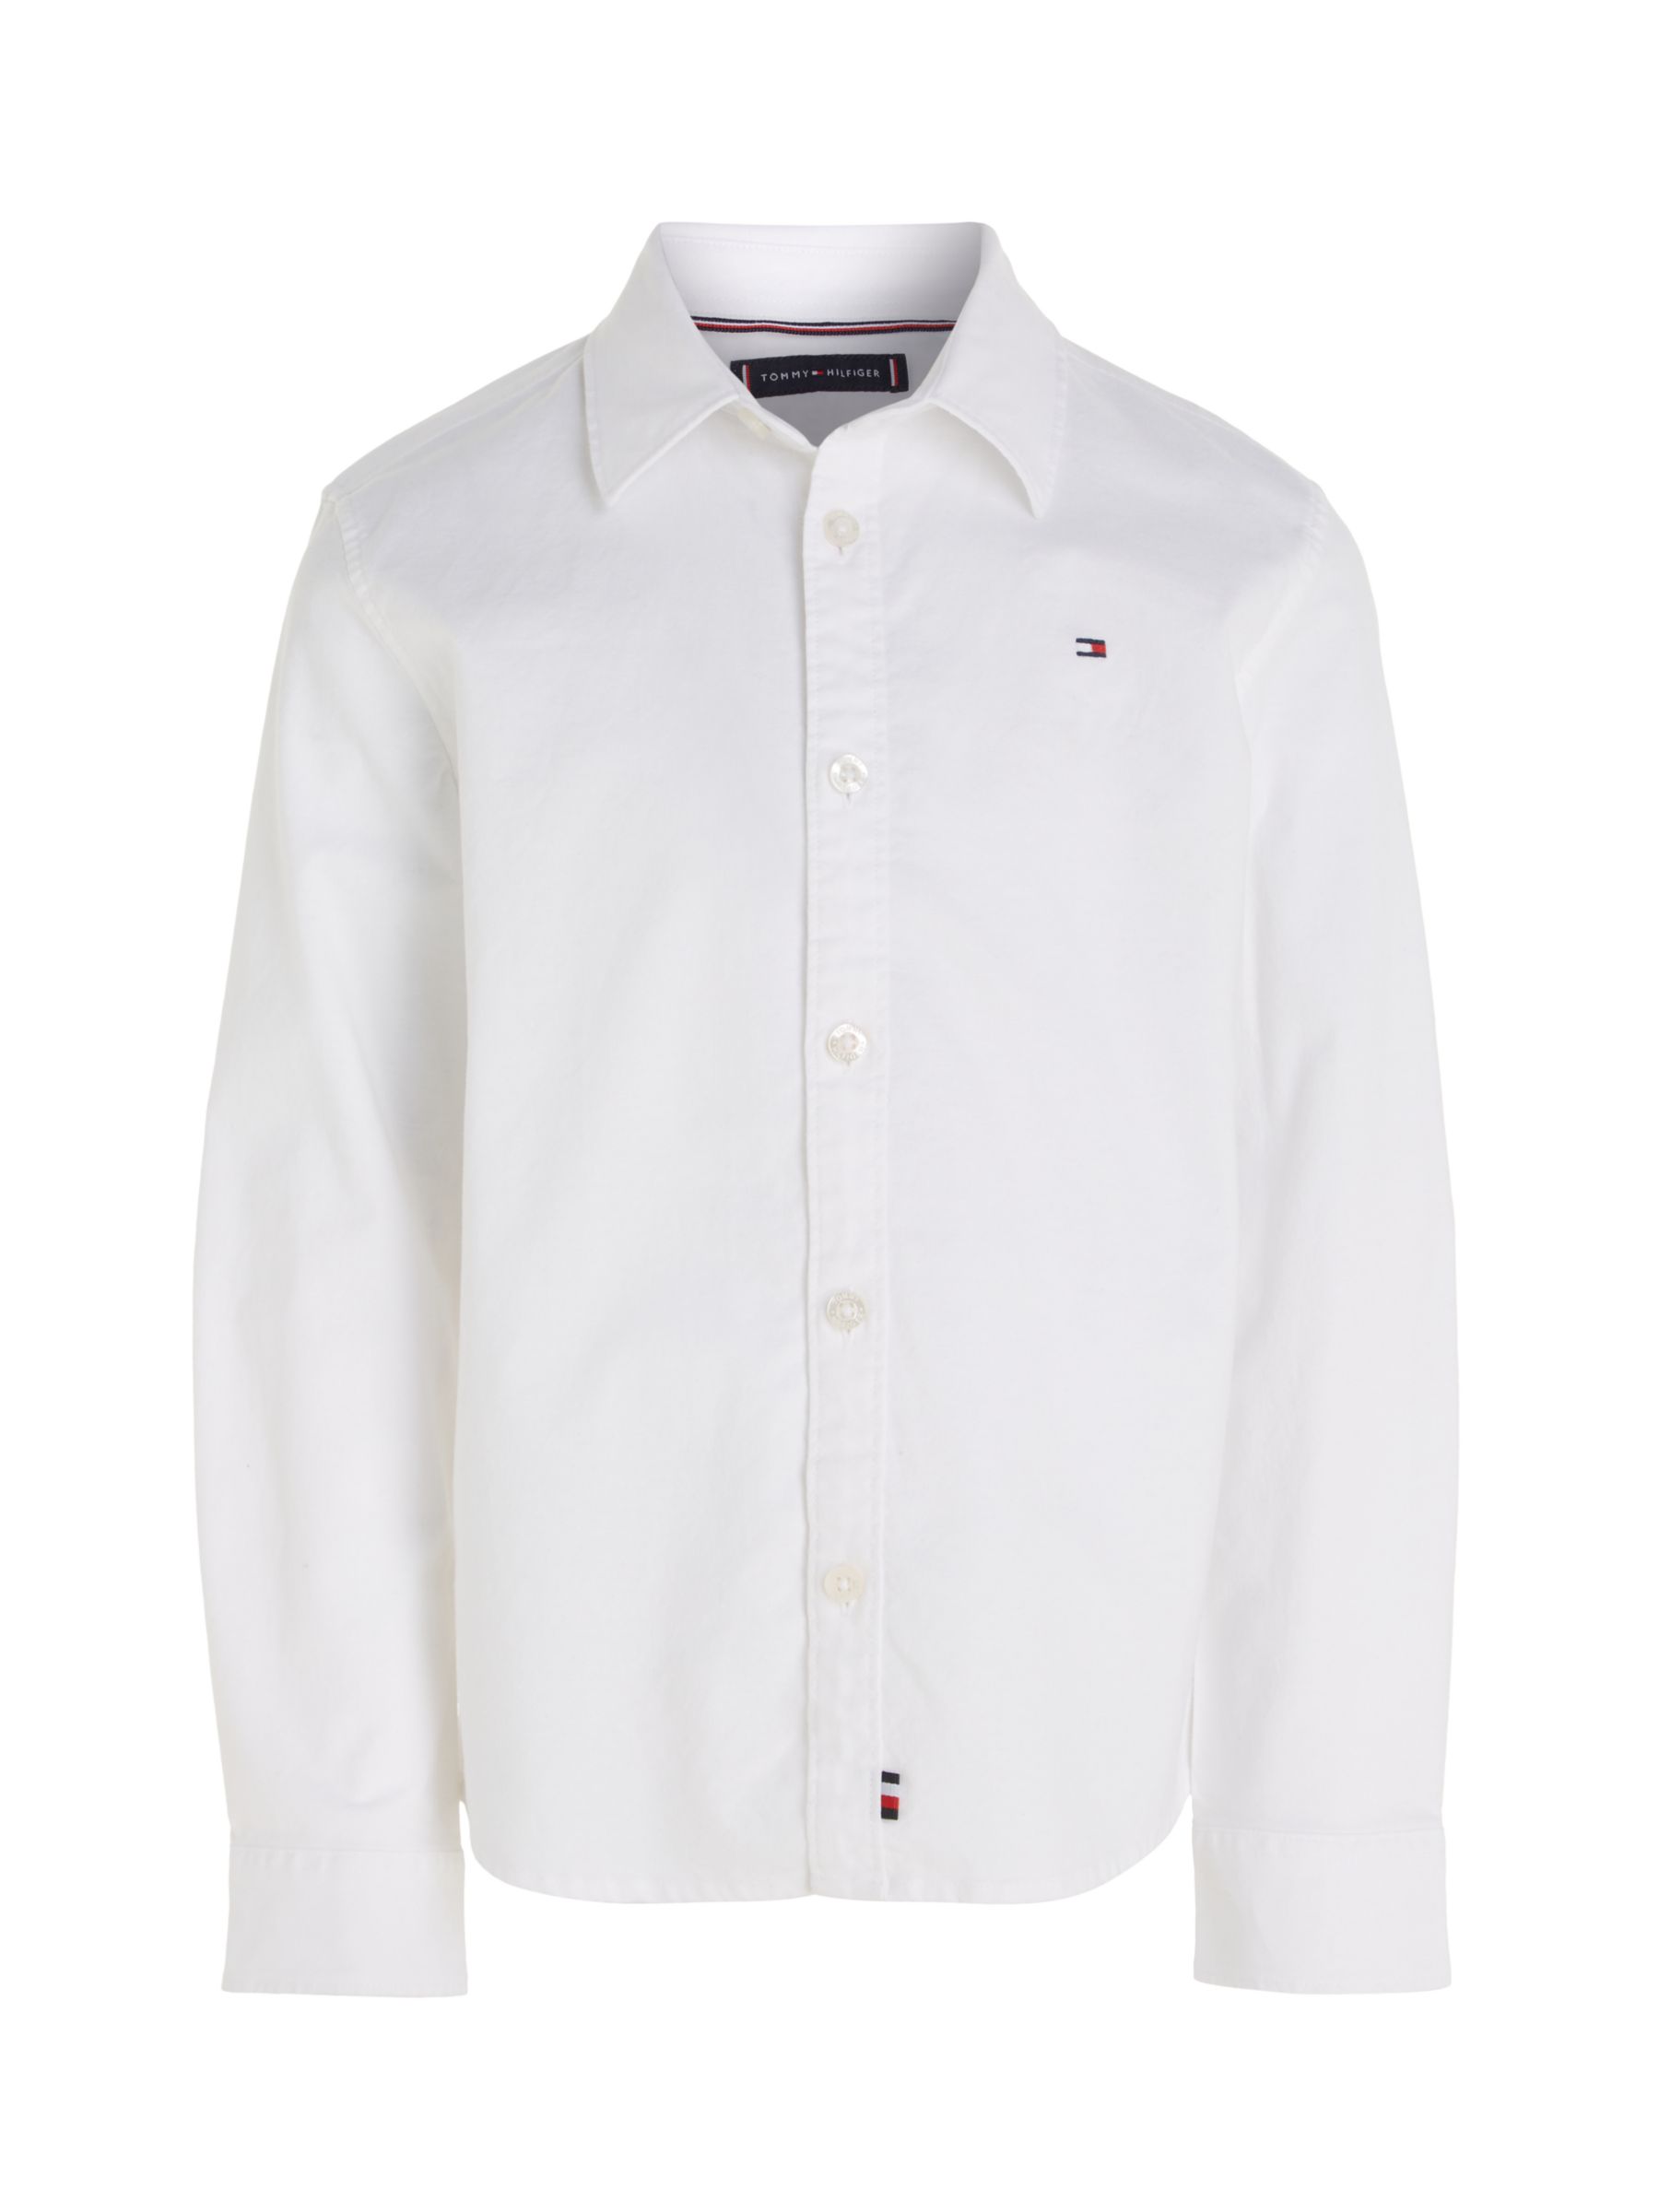 Tommy Hilfiger Kids' Flag Oxford Shirt, White, 10 years